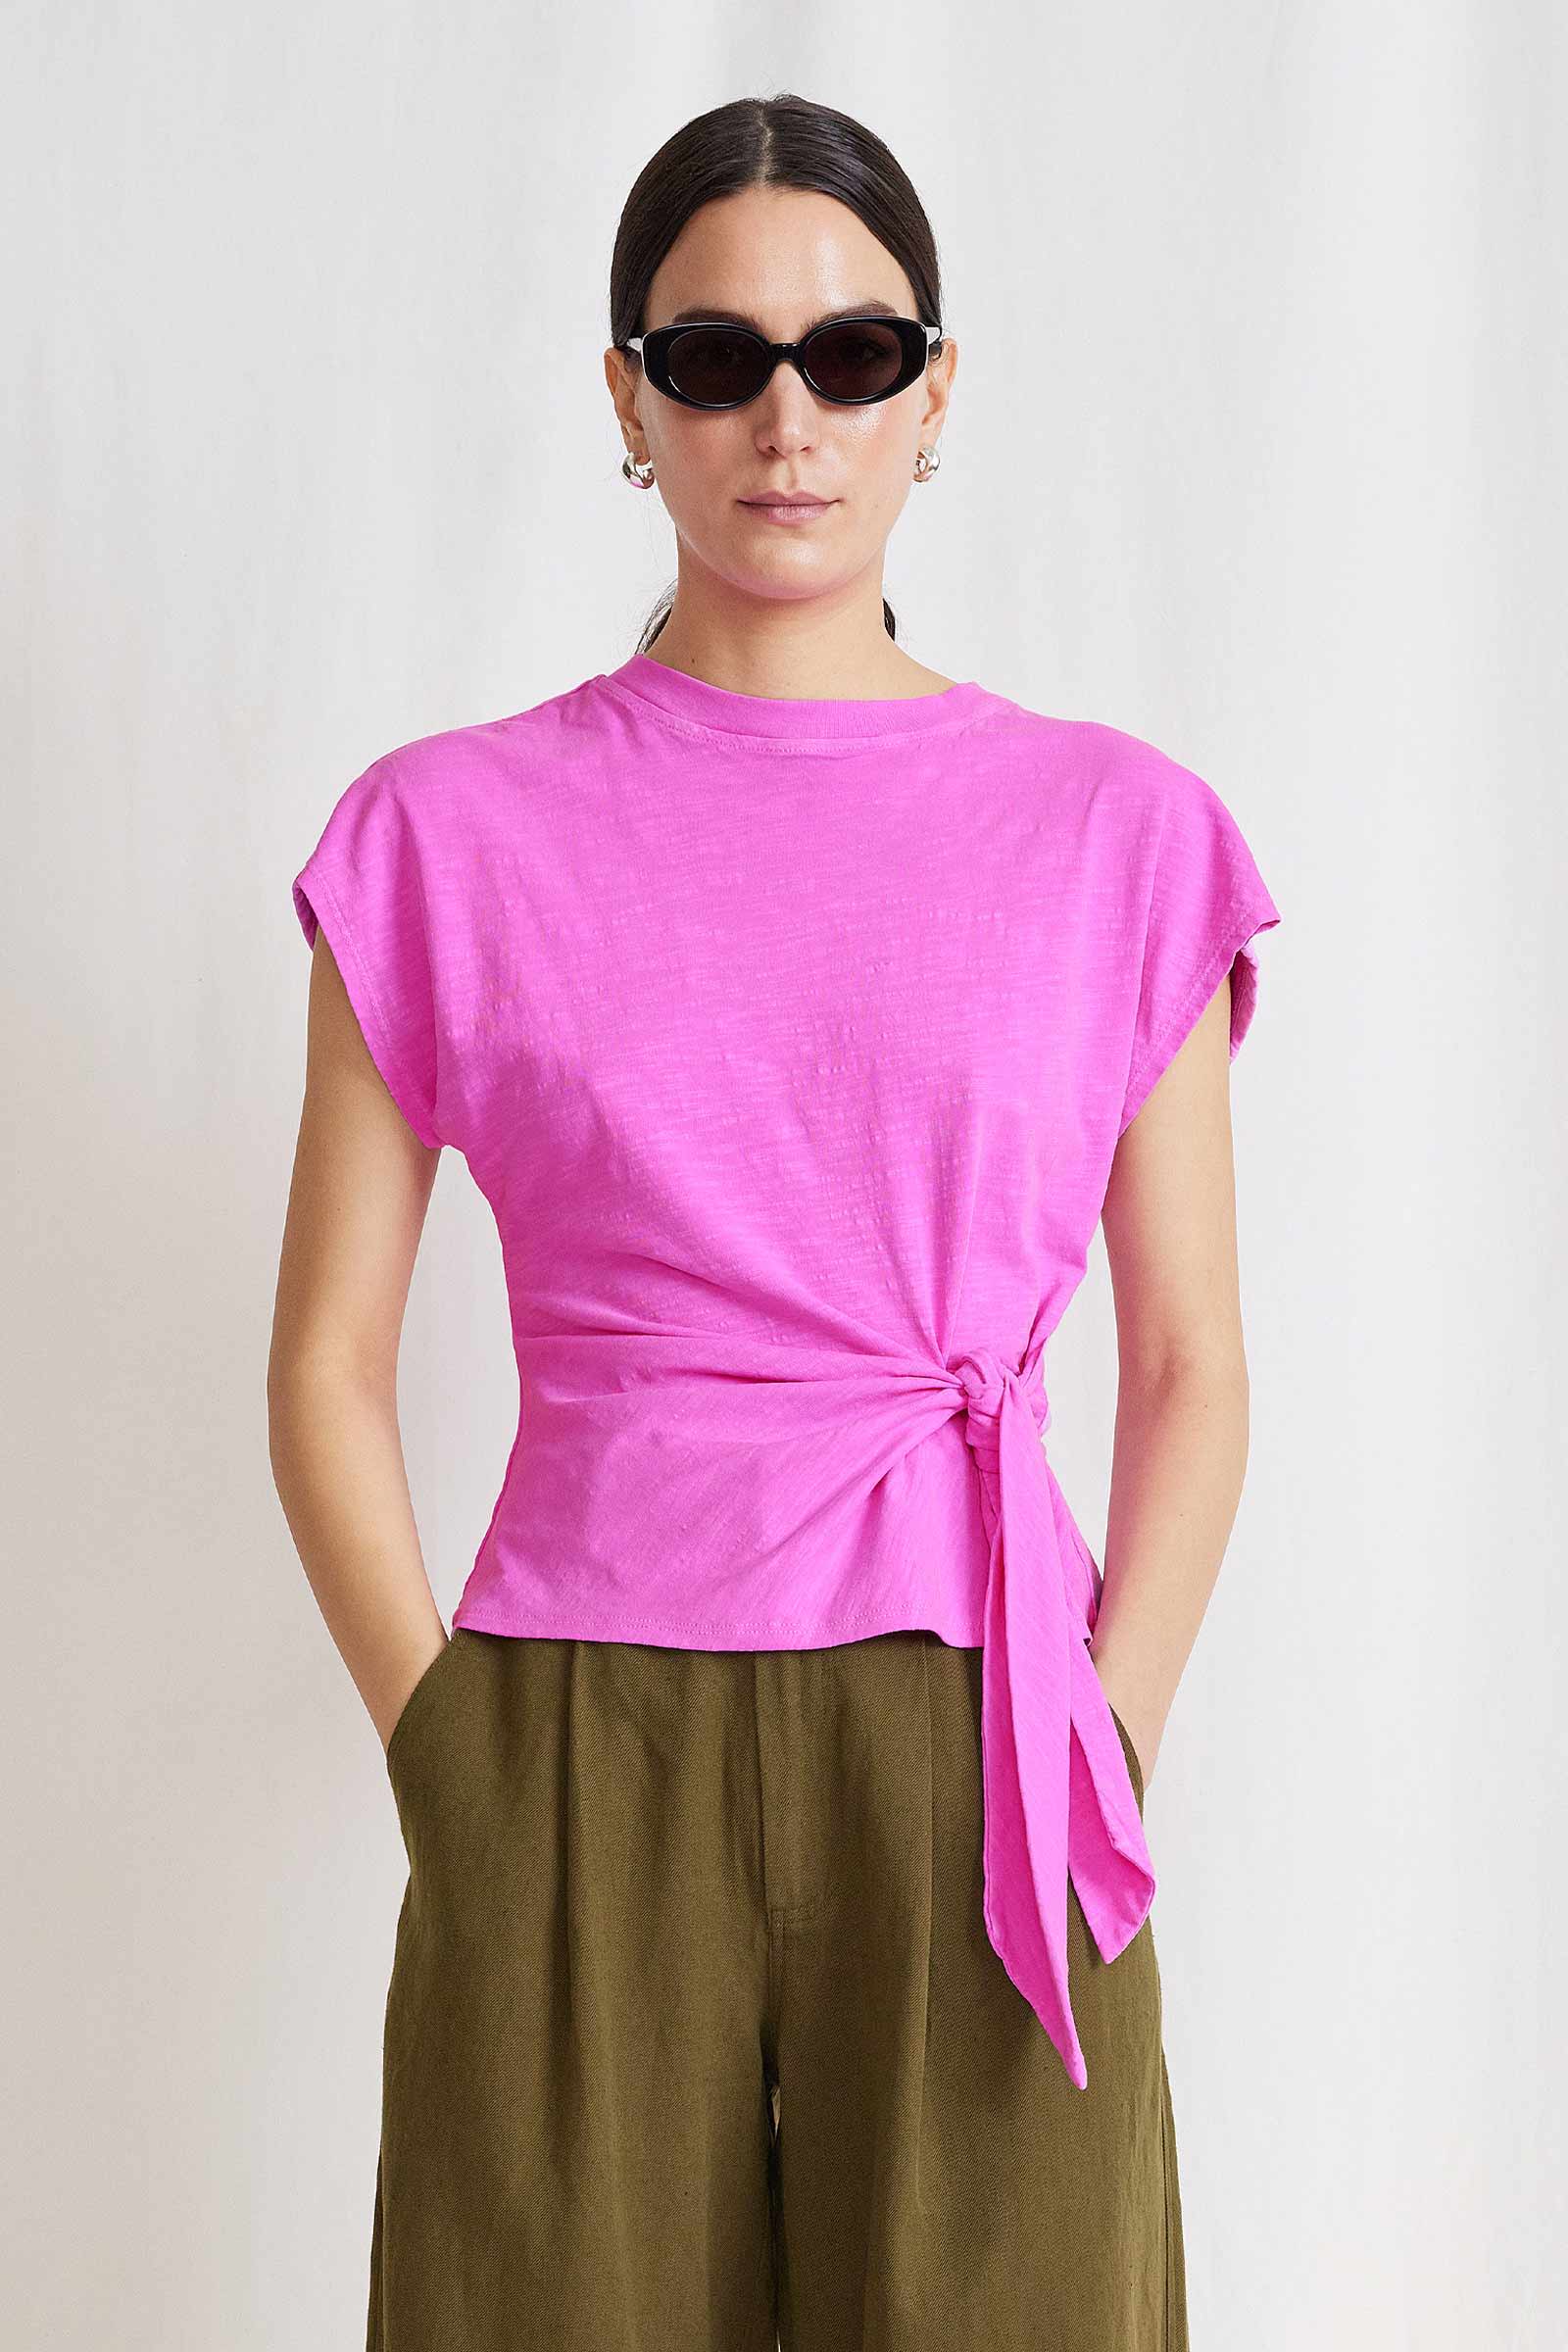 A lookbook image of a model wearing the Apiece Apart Nina Cinched Top Fuchsia.